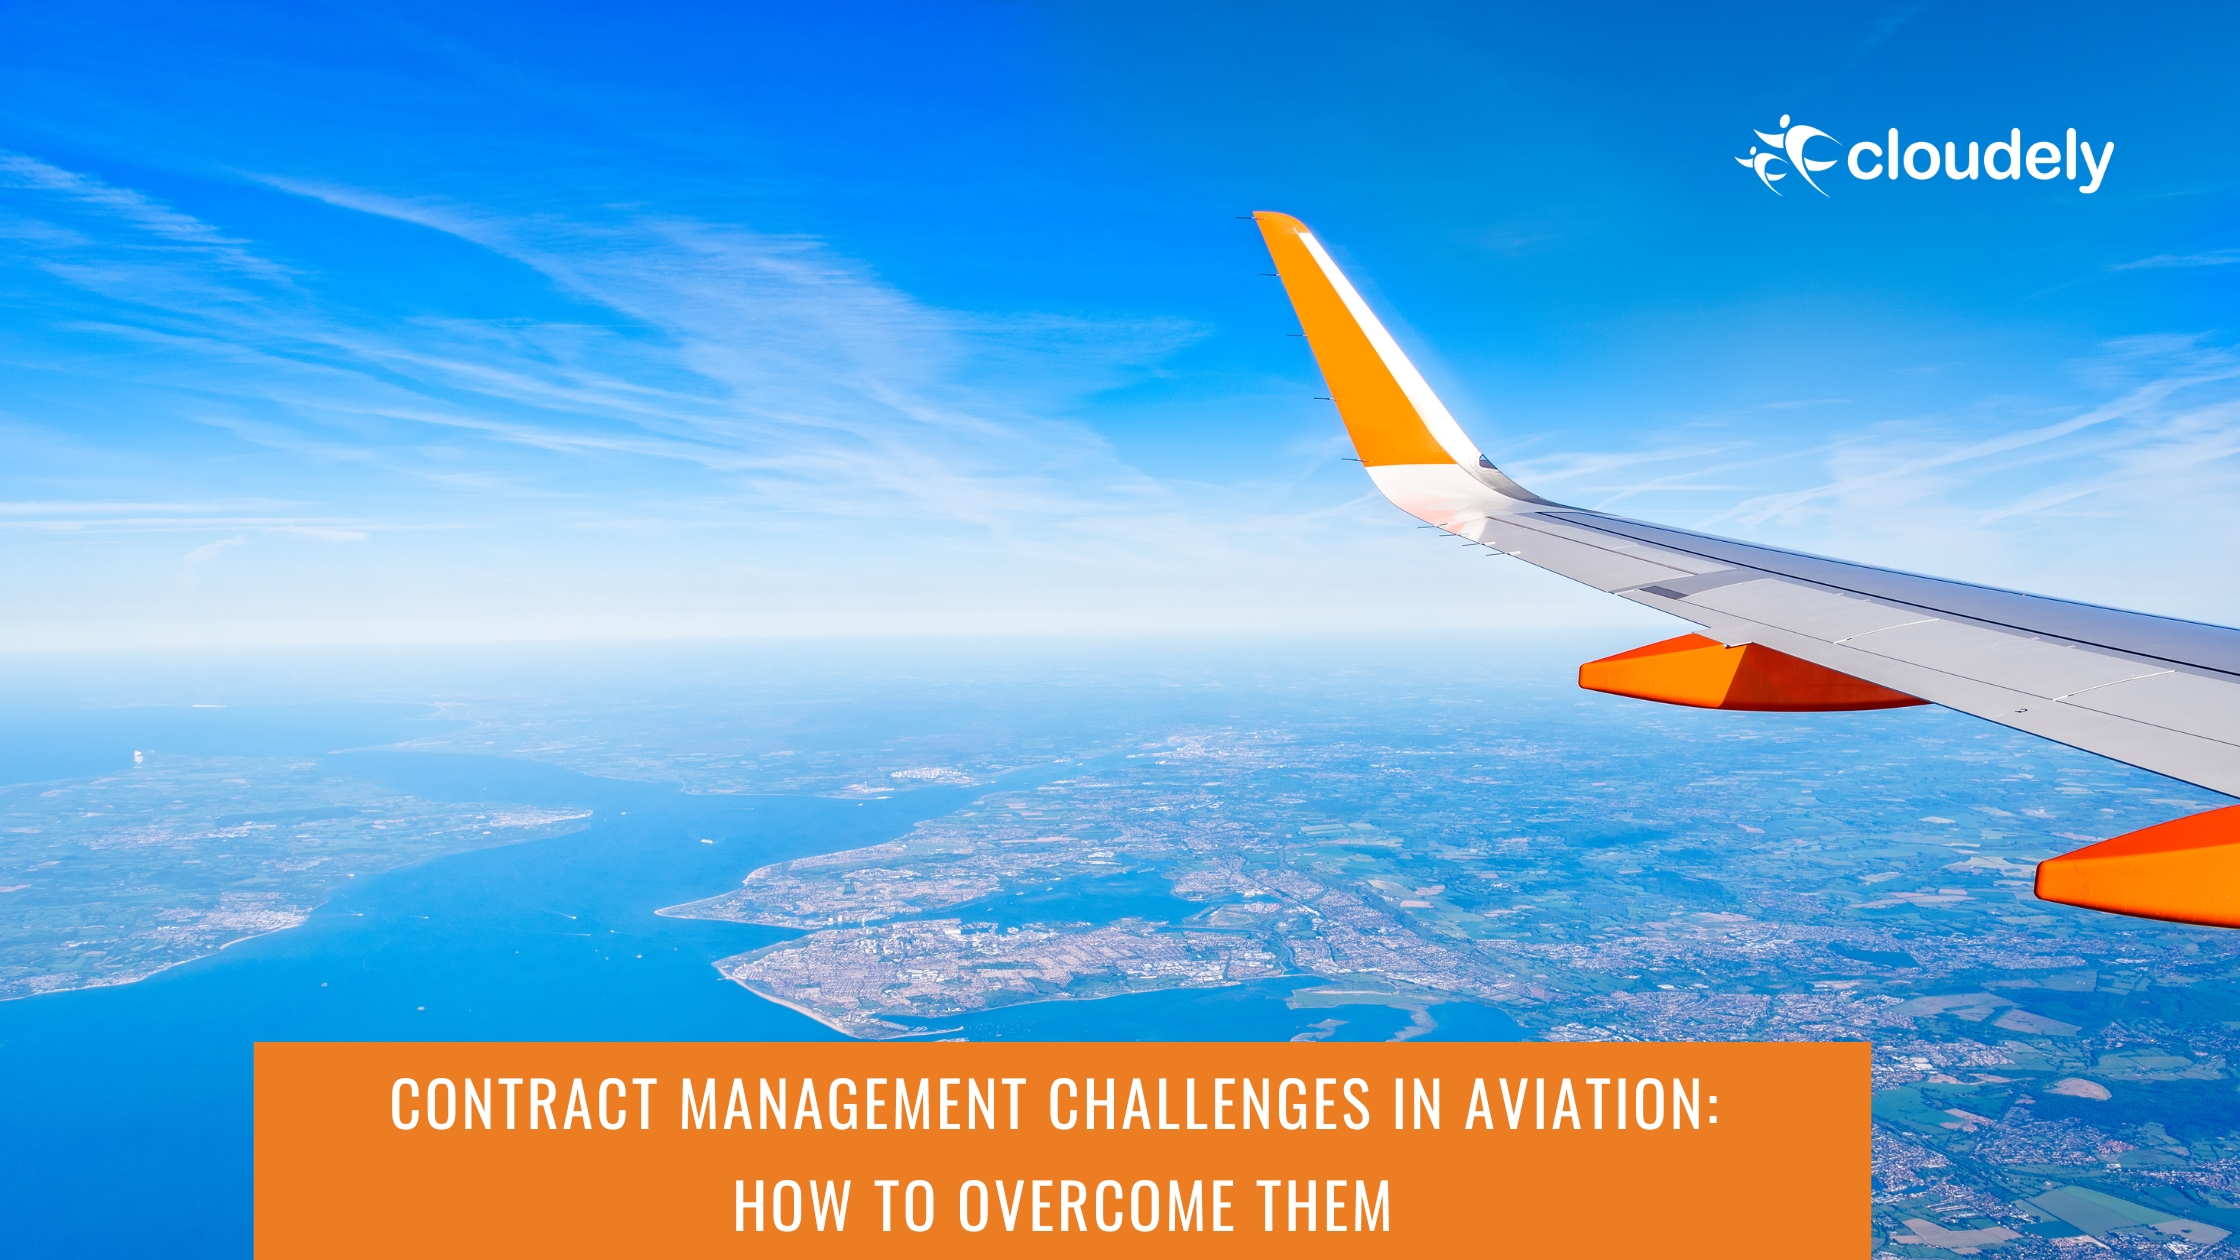 Contract management challenges in aviation